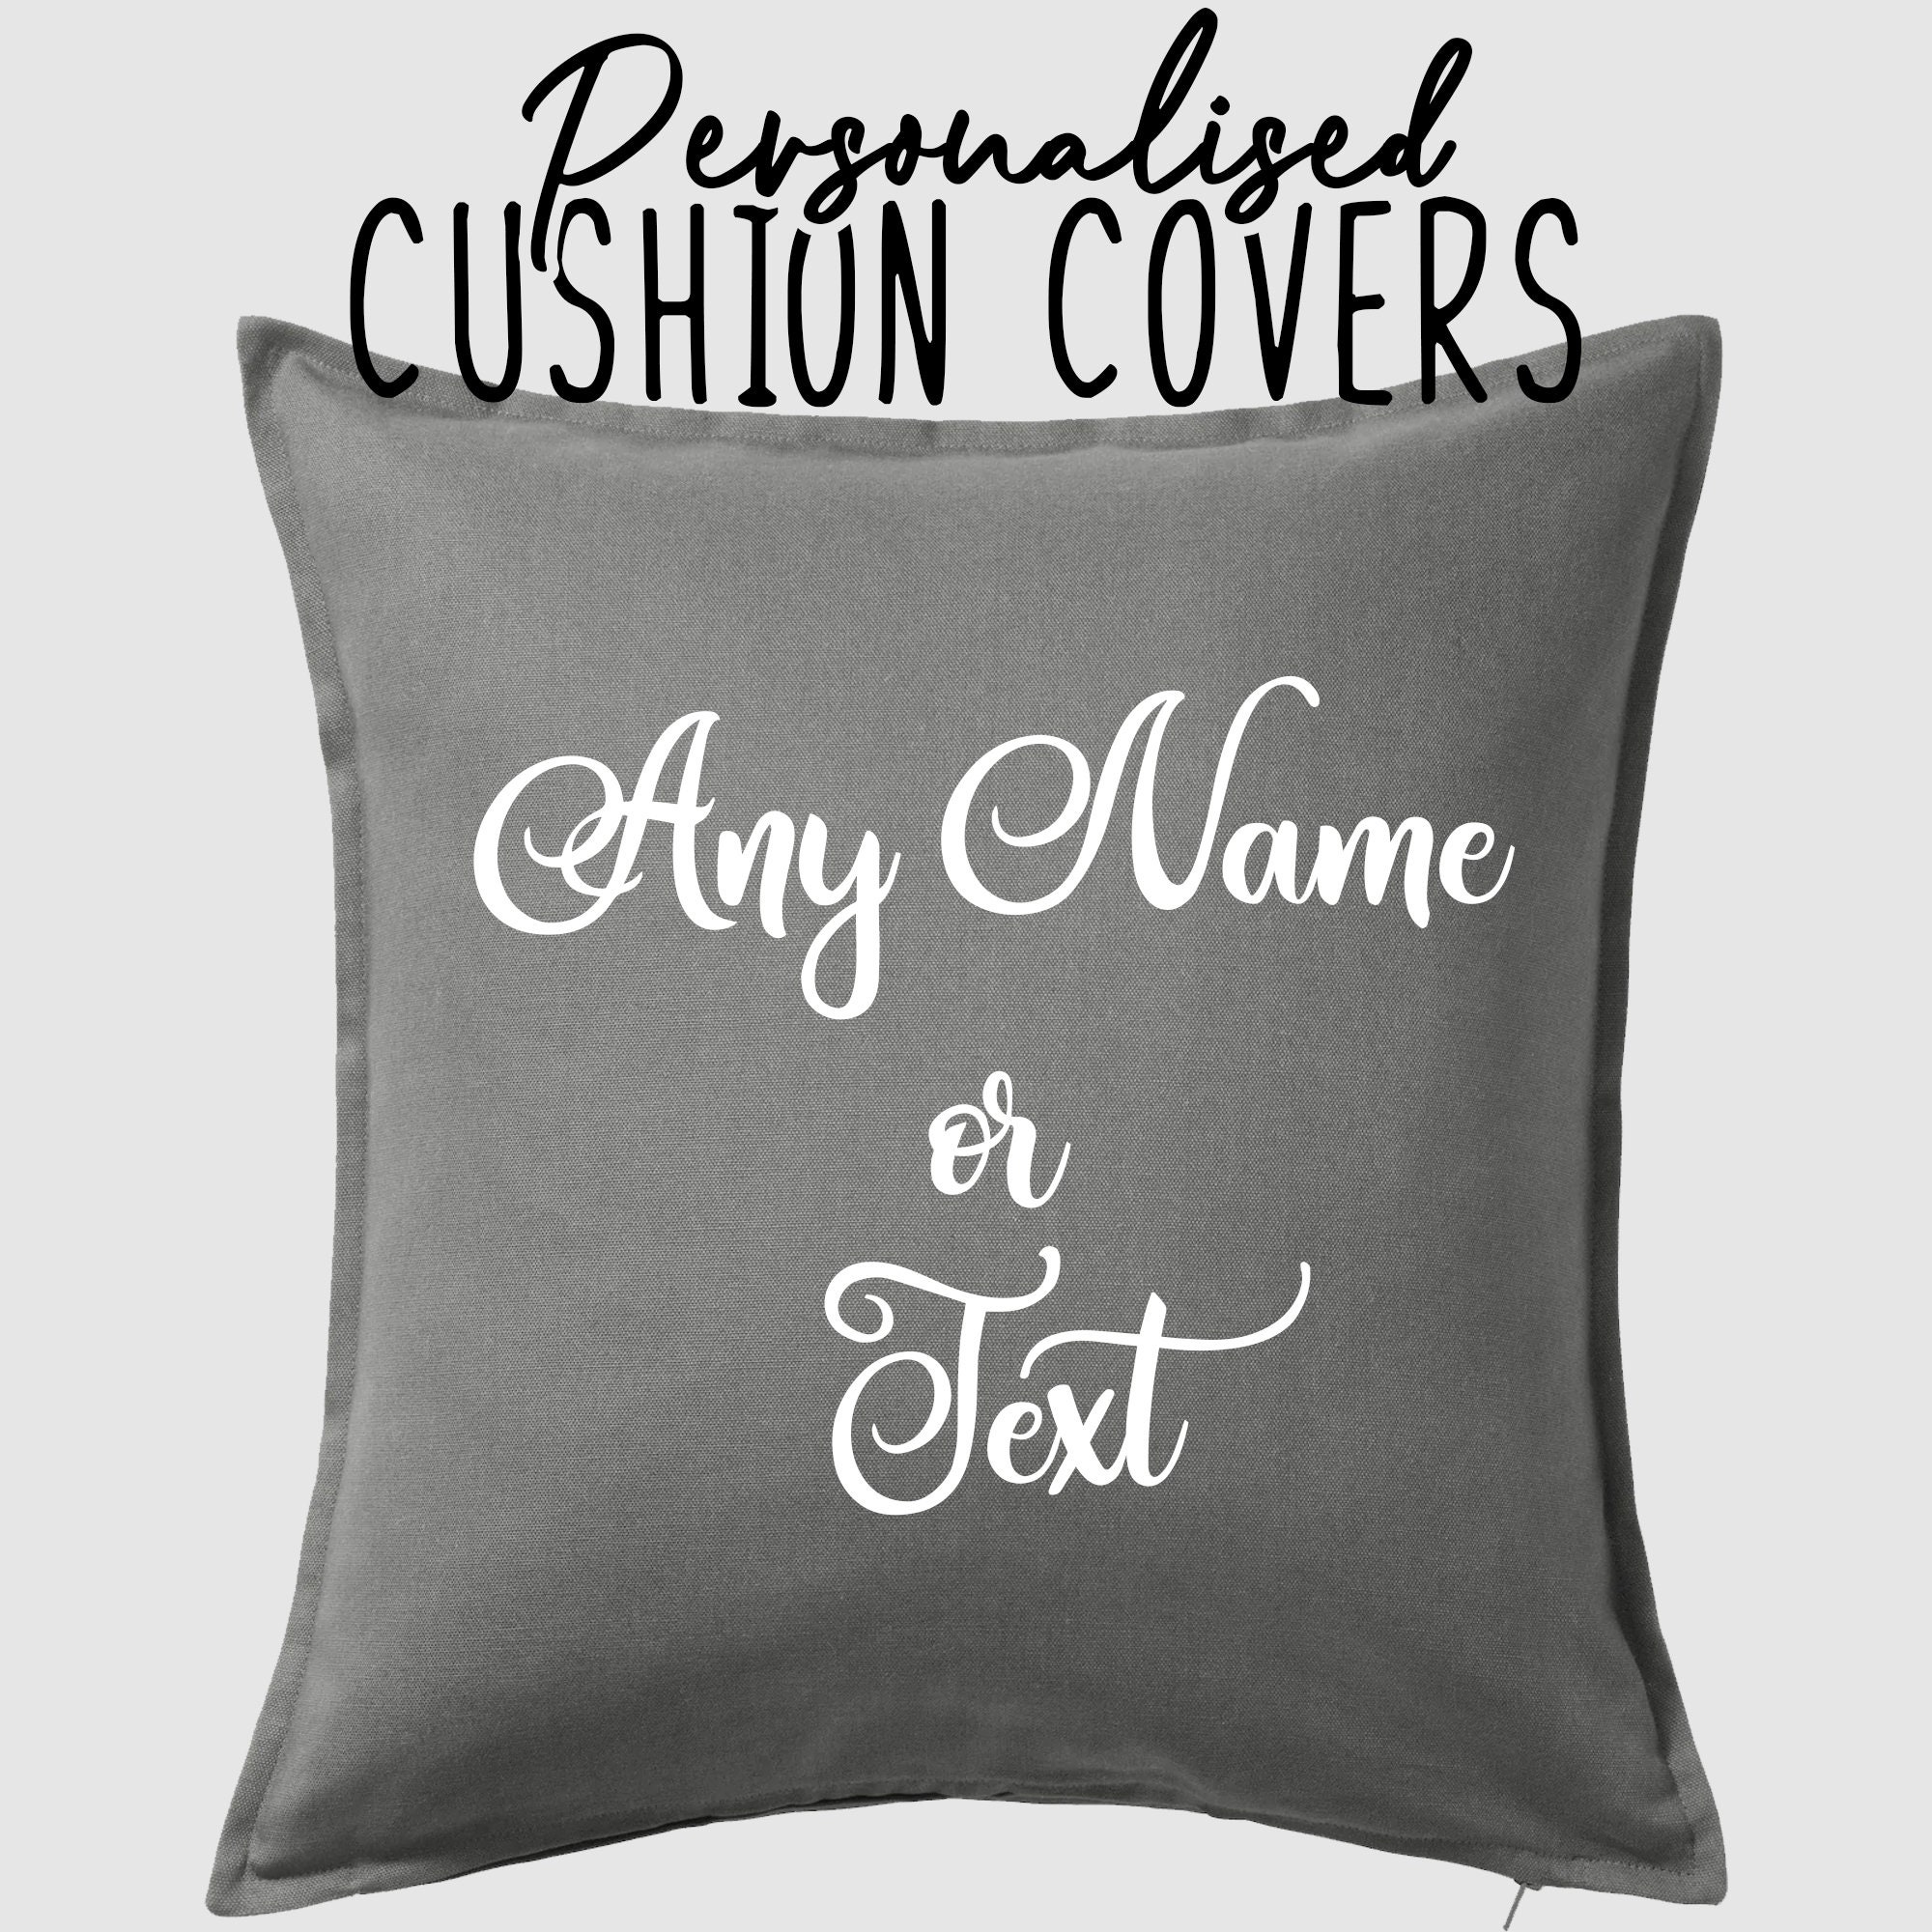 Personalised Cushion cover any name any text and colour 